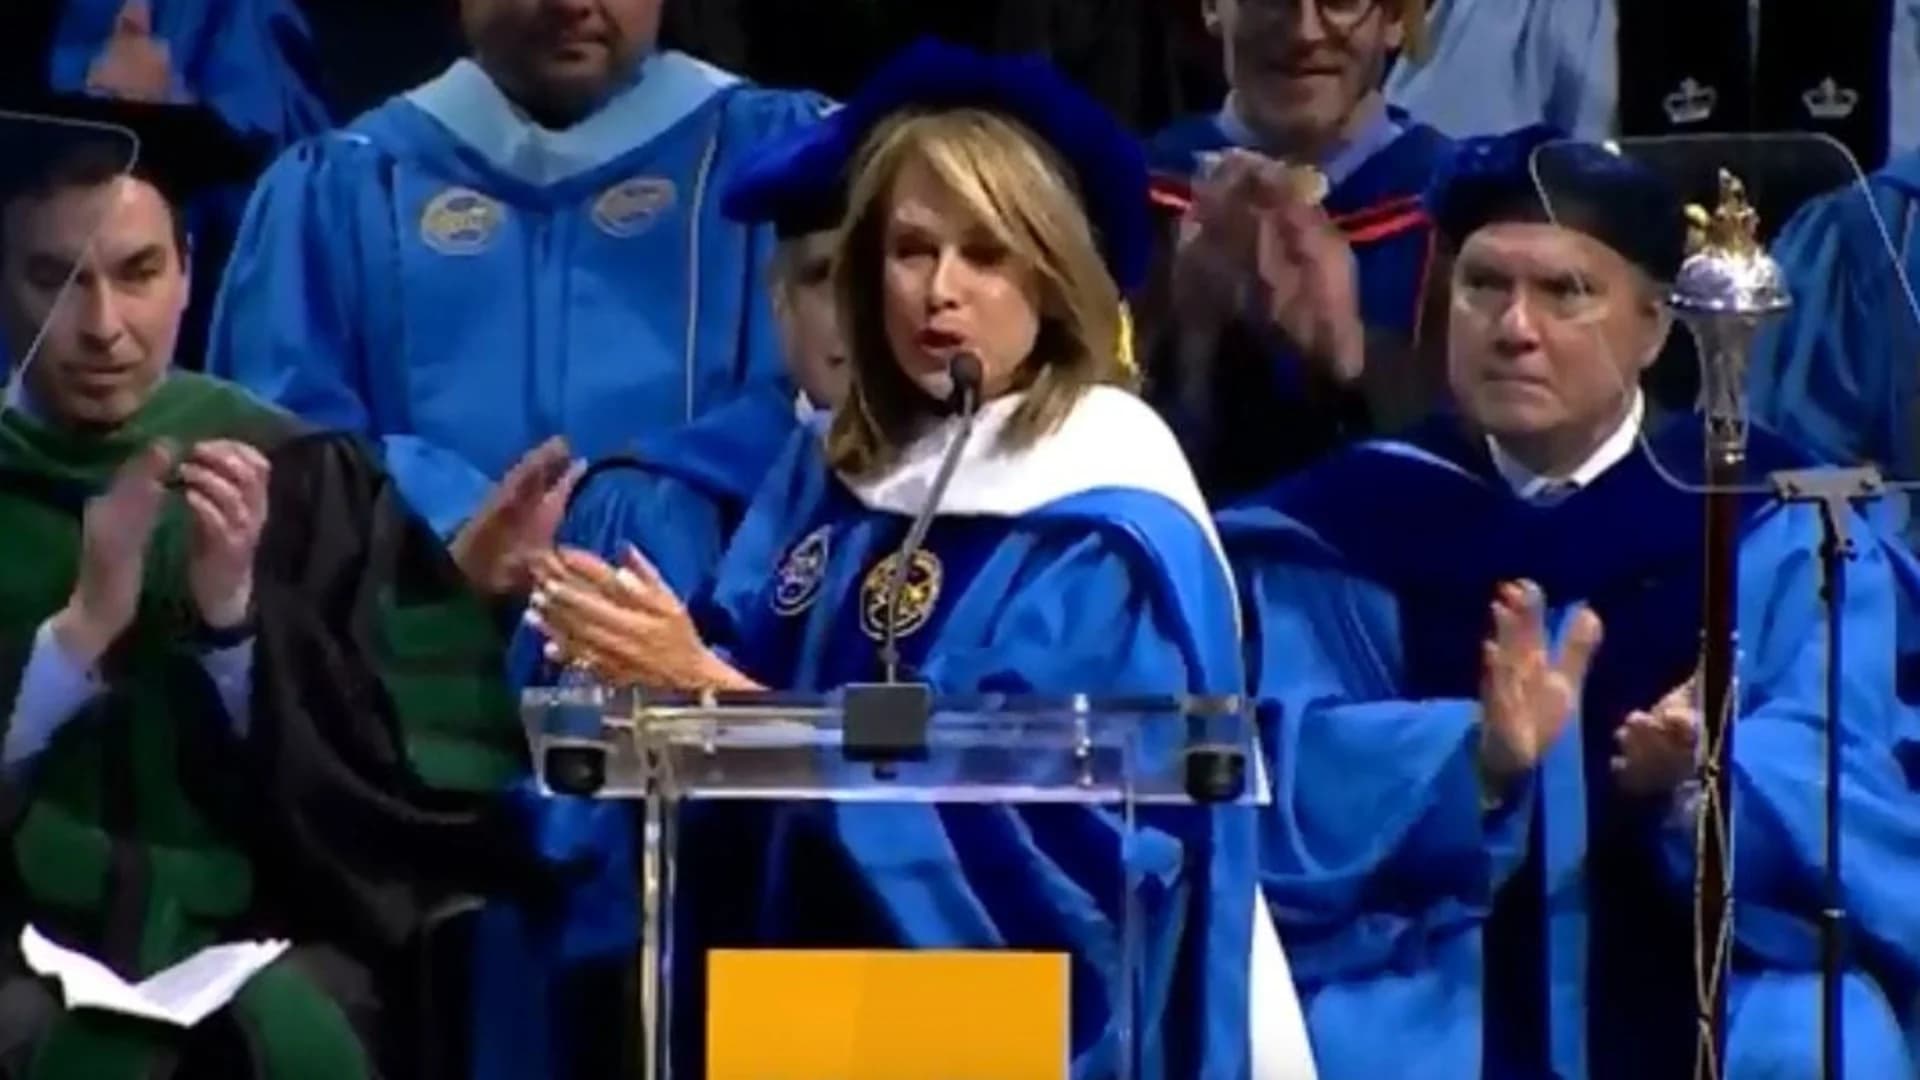 WATCH: Carol Silva delivers the 2018 NYIT commencement address